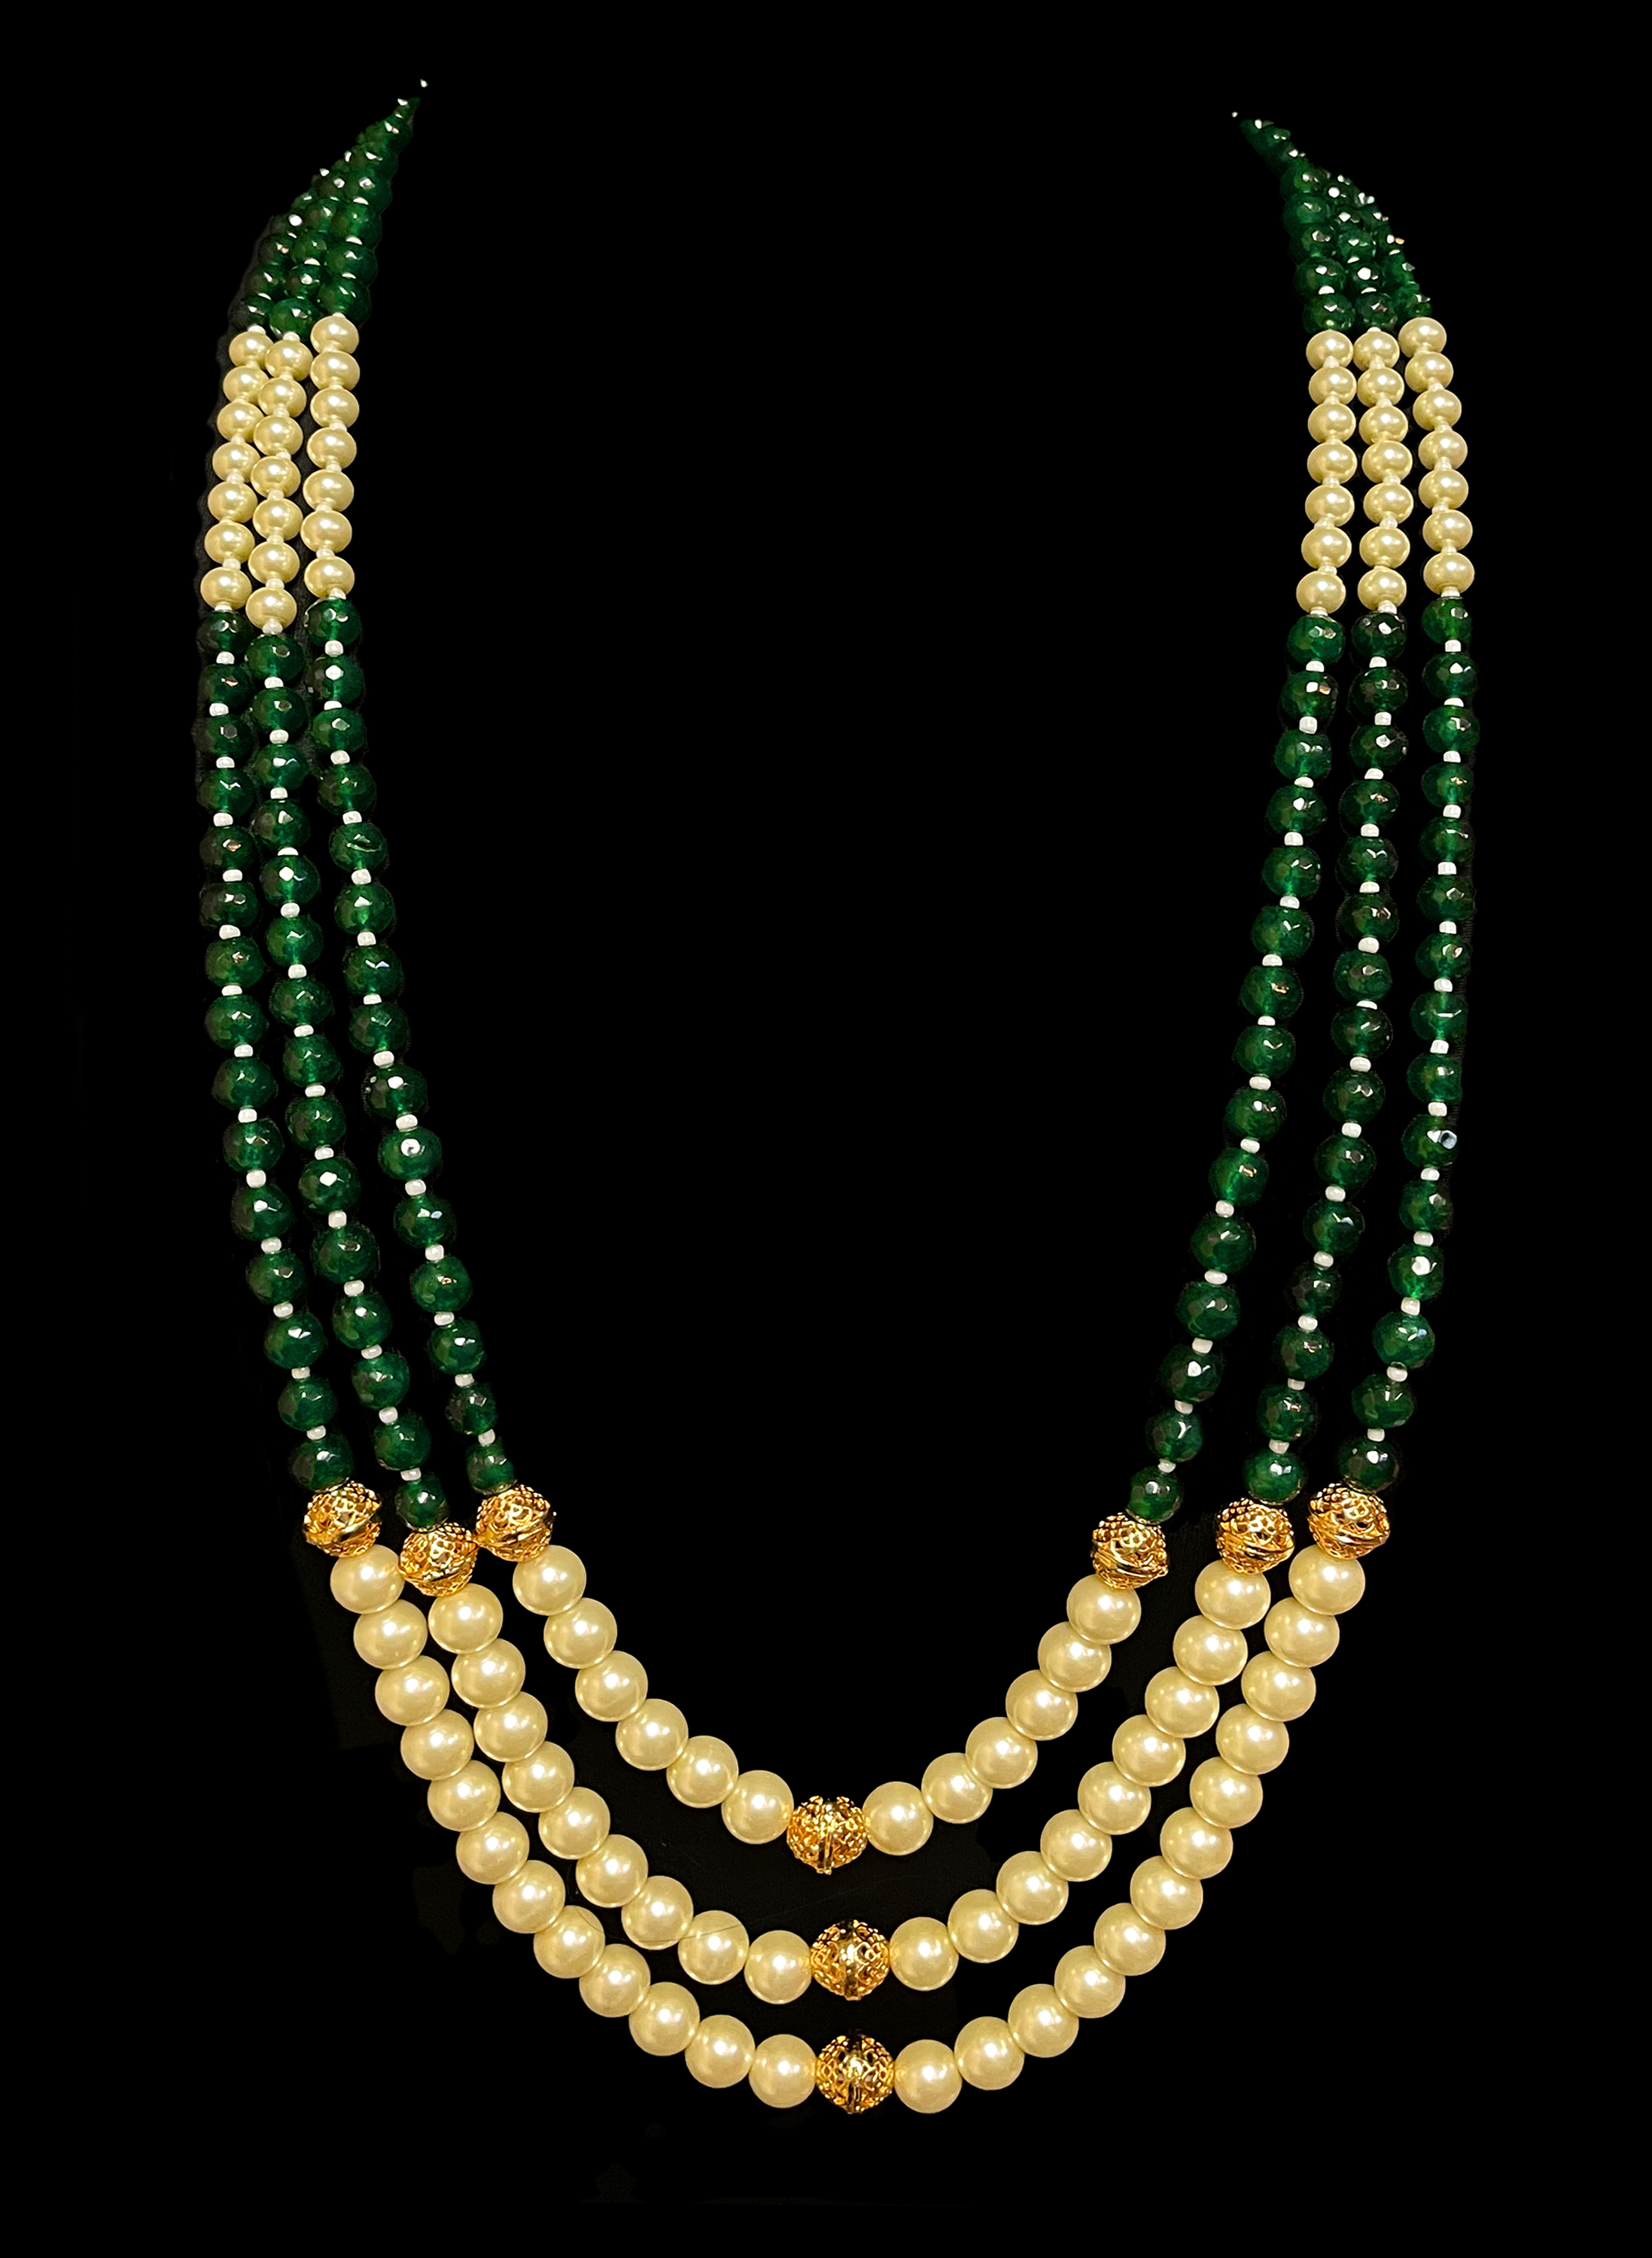 Indian Grooms jewelry necklace with pearls & emeralds